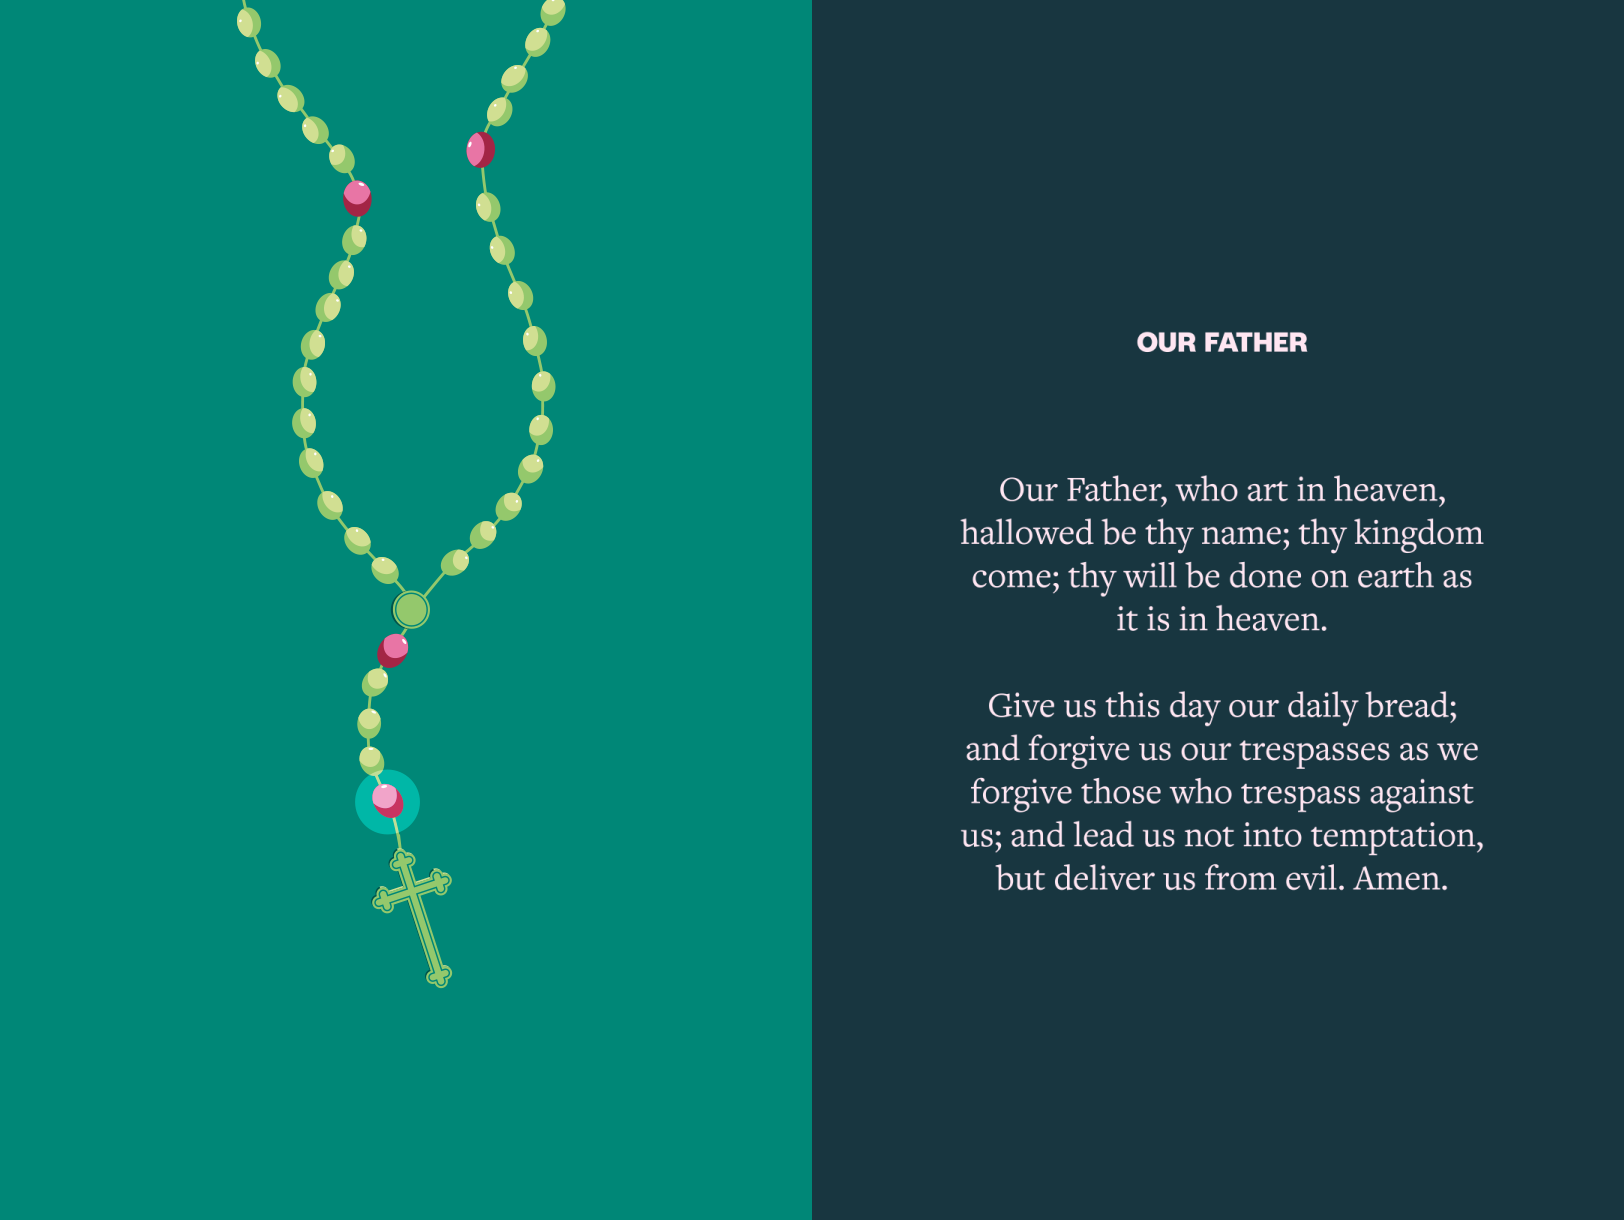 Rosary beads with a spotlight on the first bead